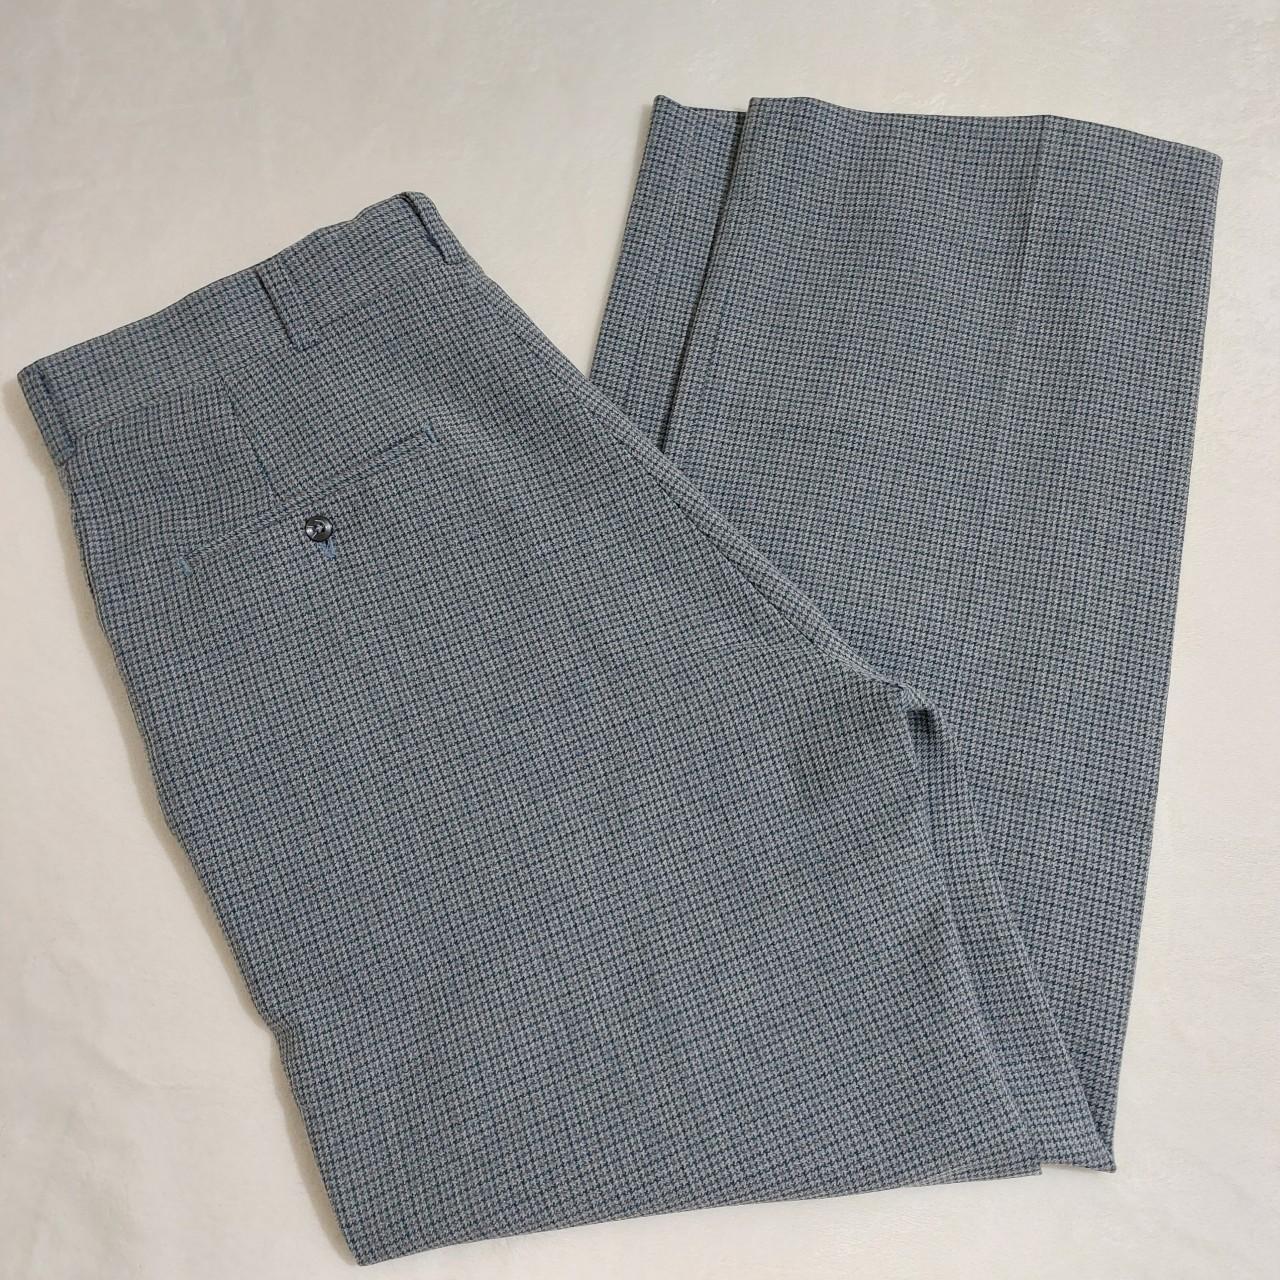 Haggar Men's Grey and Blue Trousers